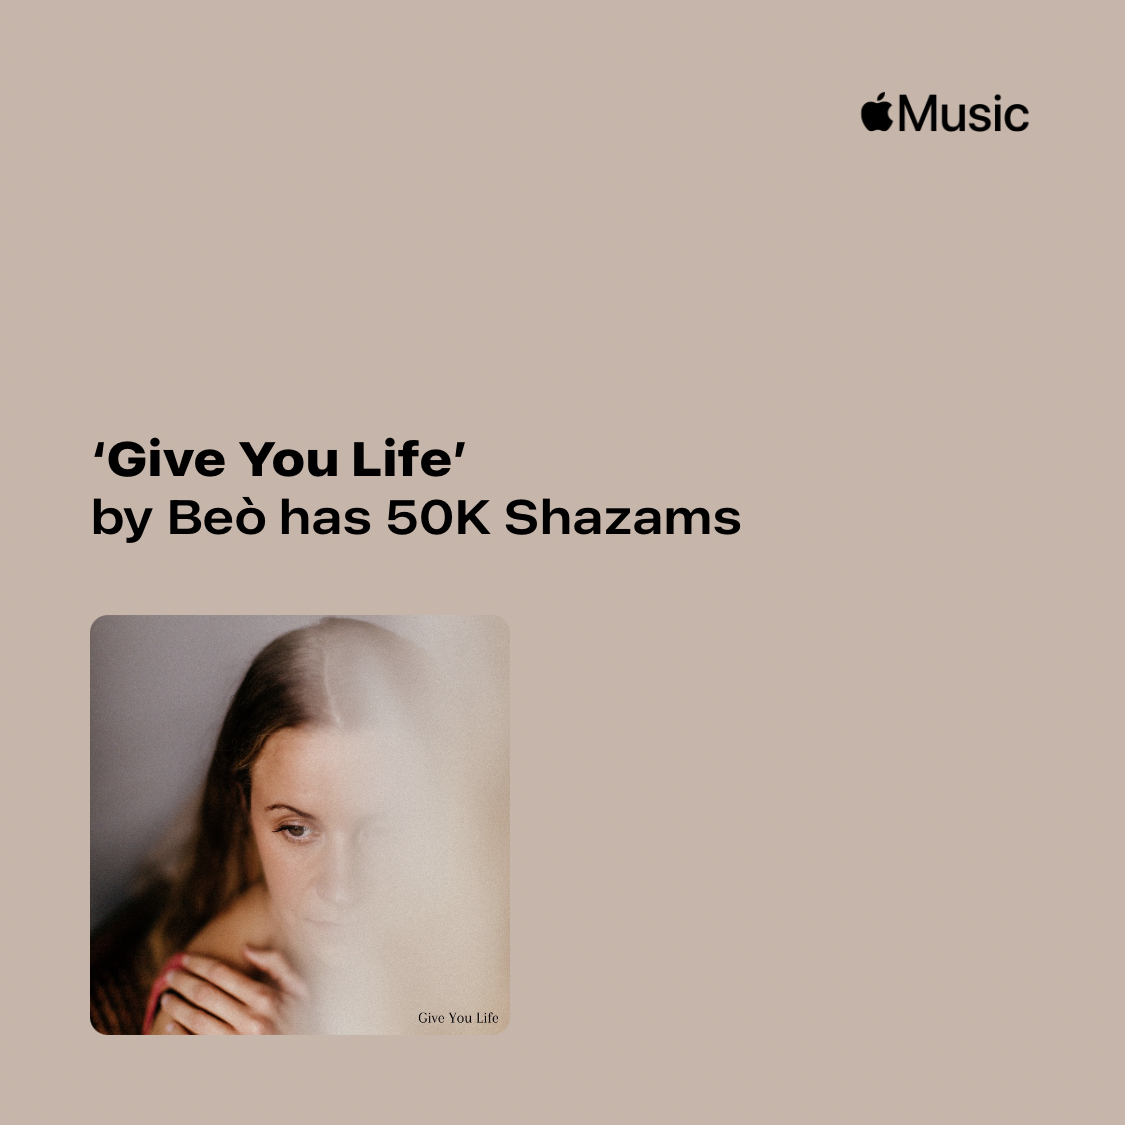 WILD that this little song has had over 50,000K @Shazam ! Thank you to @paramountplus for featuring it in your movie, The In Between, and giving it wings 🦢
You can listen to 'Give You Life' here 😊
open.spotify.com/track/5cjOcoO1… @AppleMusic #TheInBetween #LoveNeverDies #Musicinfilm